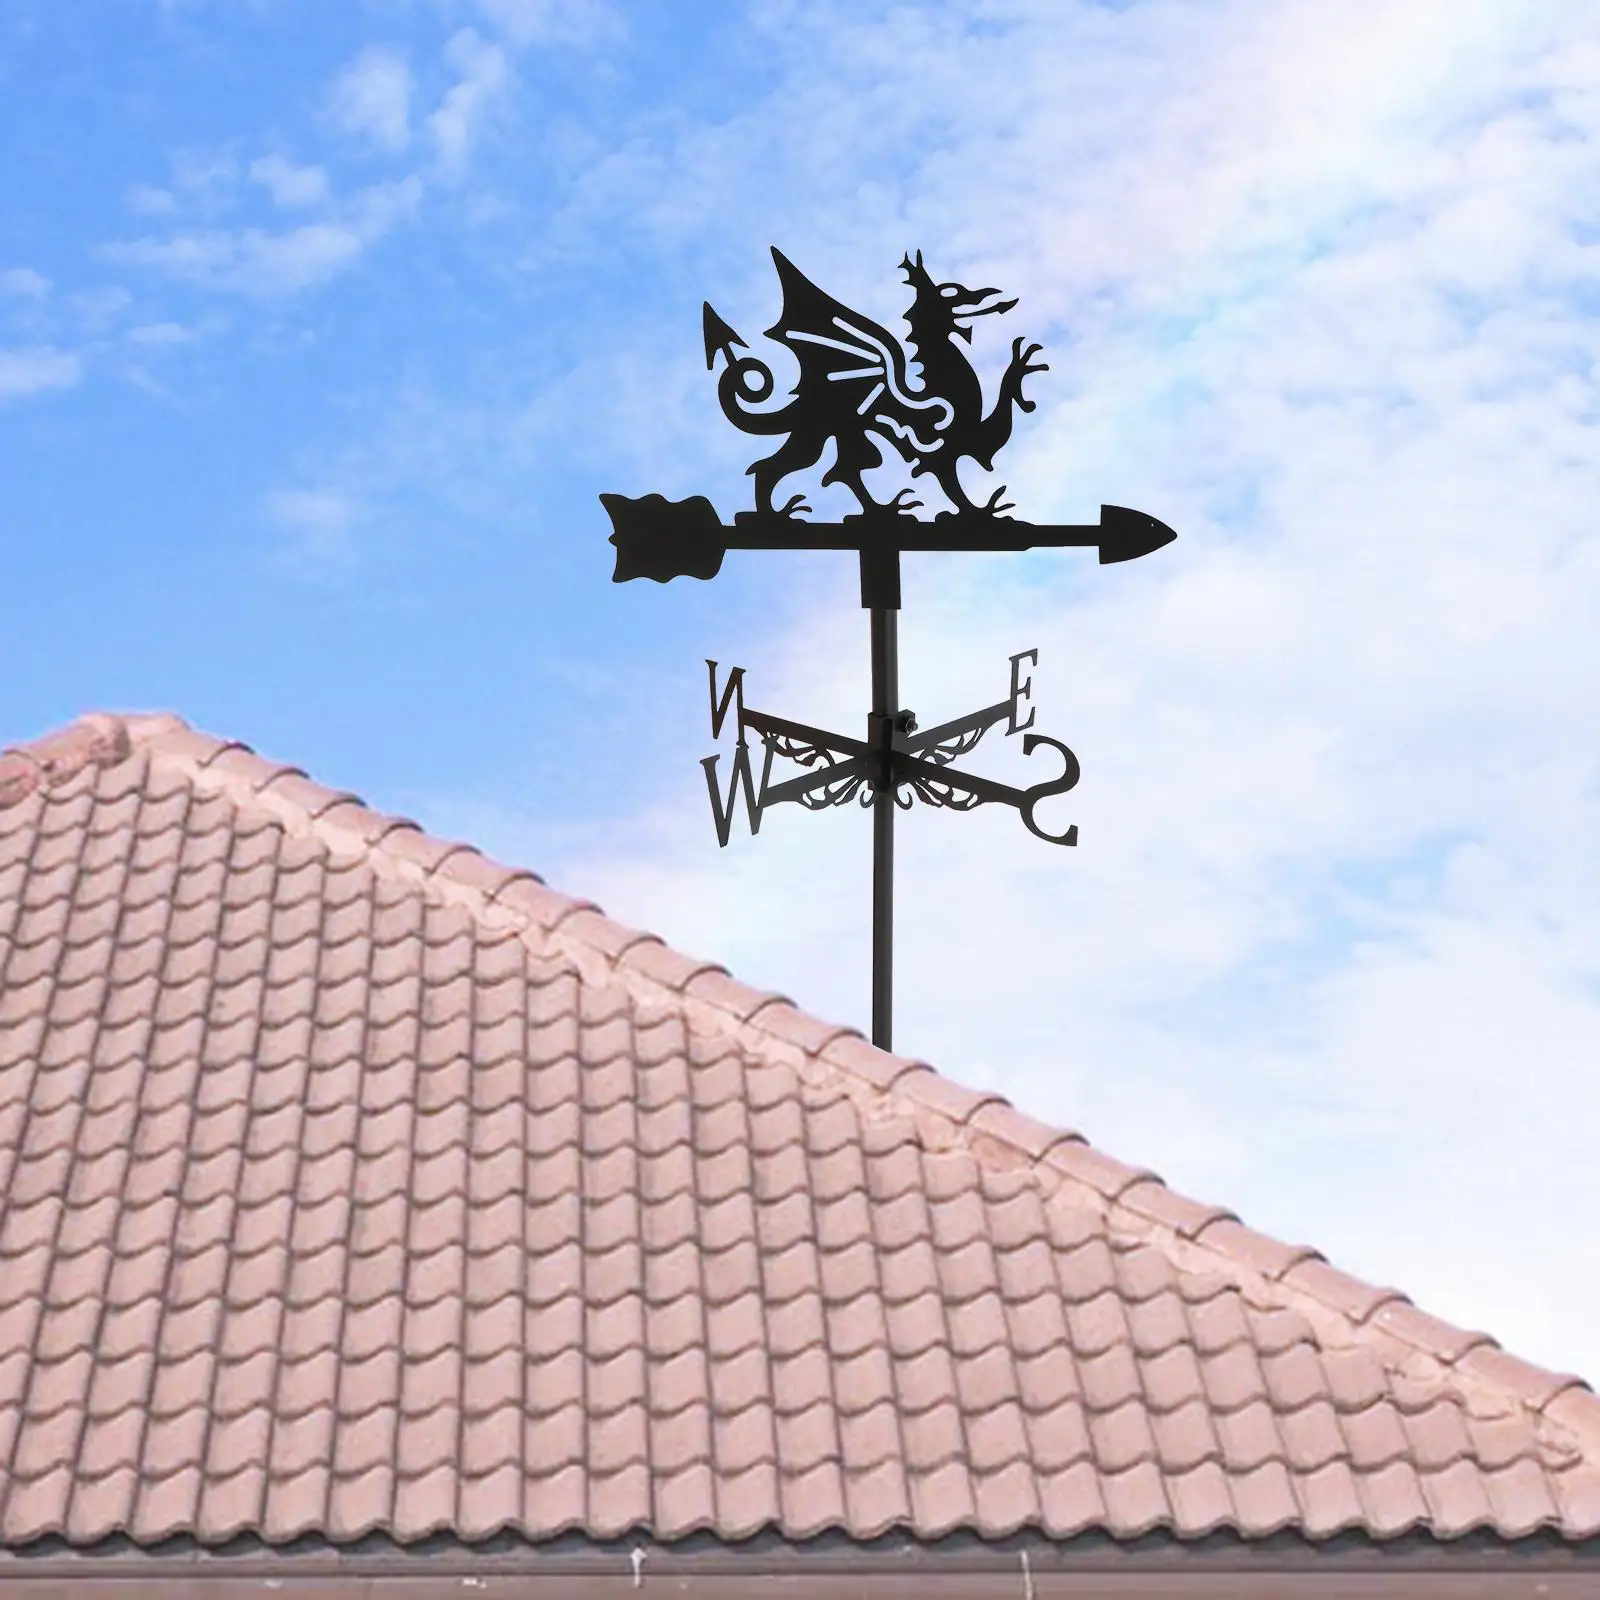 Iron Weather Vane Wind Vane Wind Direction Indicator Roof Mount for Farmhouse Garden Patio Crafts Ornament